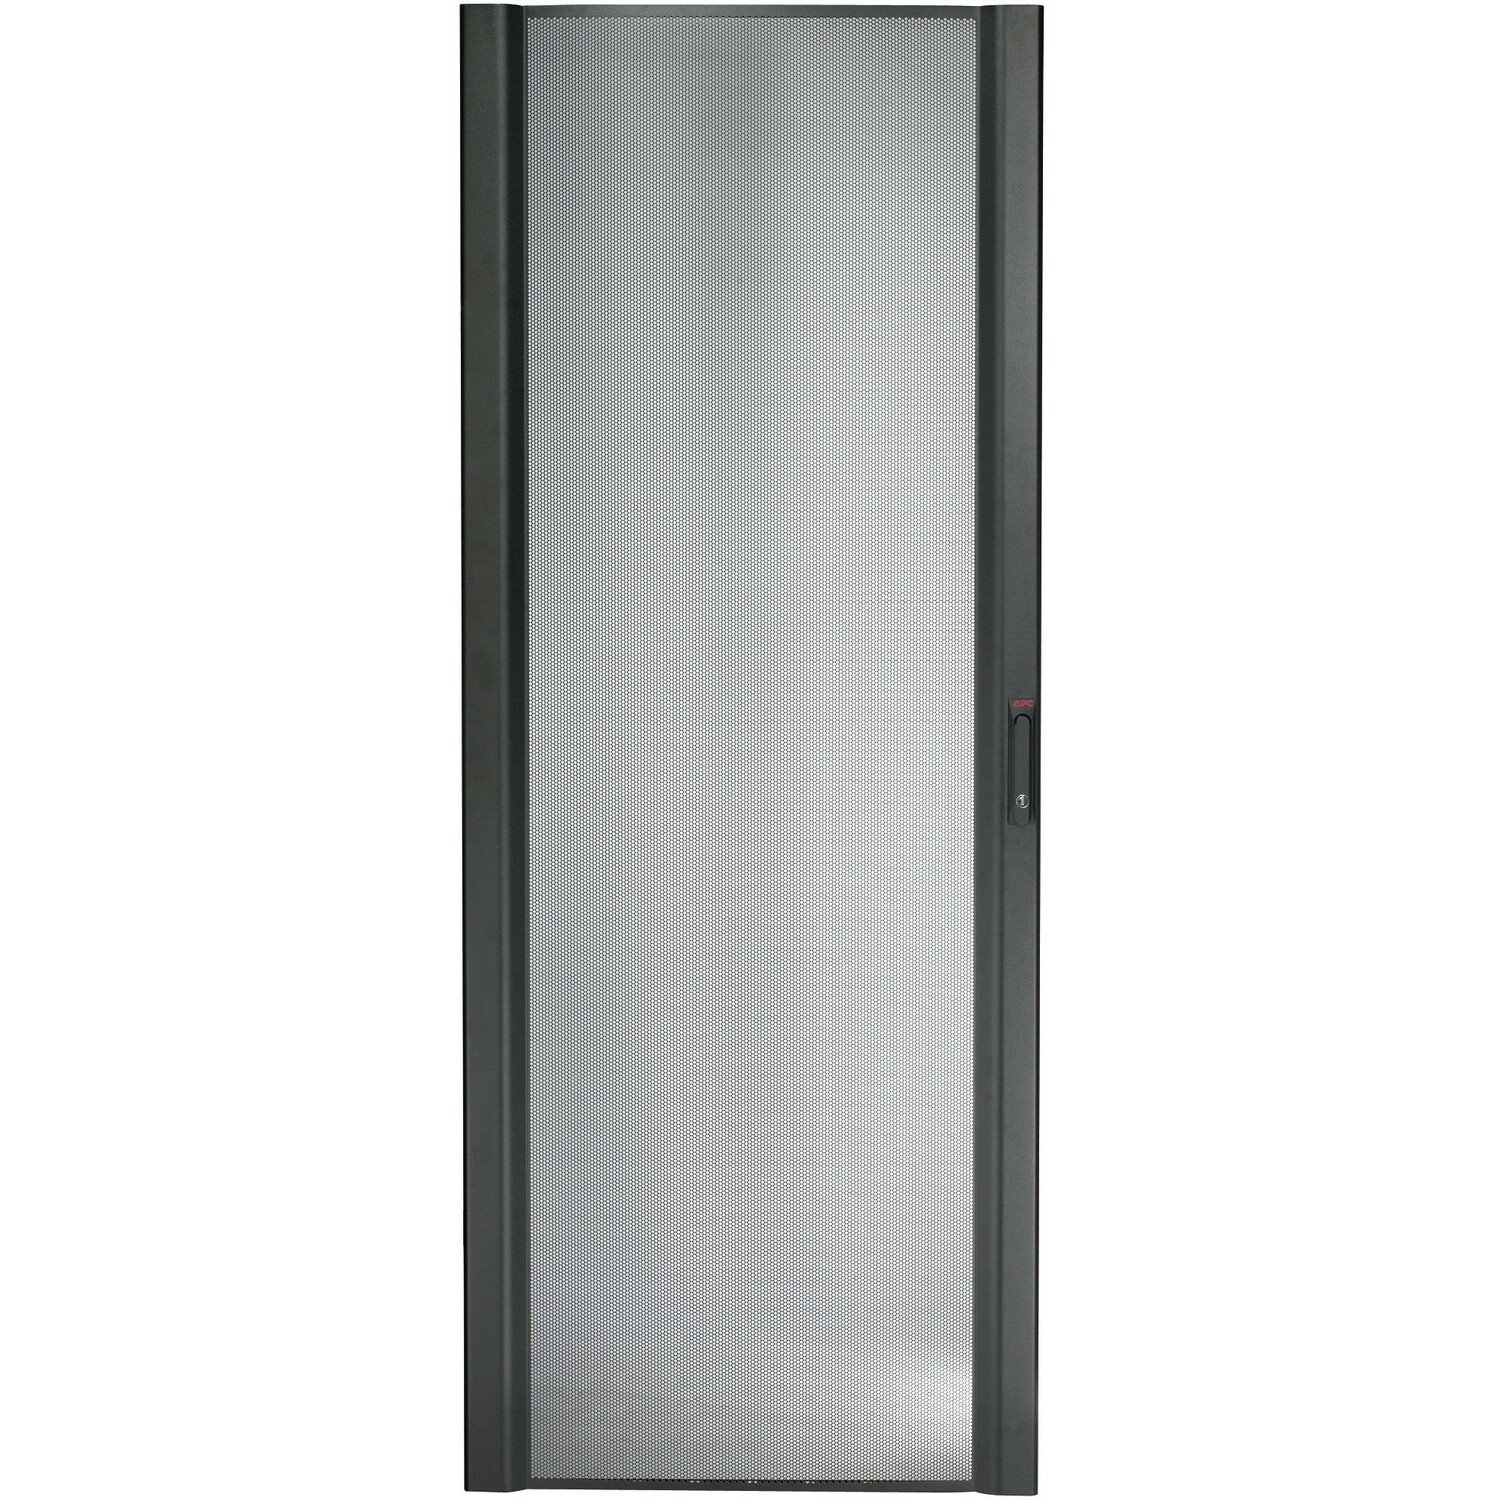 APC by Schneider Electric NetShelter SX 42U 750mm Wide Perforated Curved Door Black